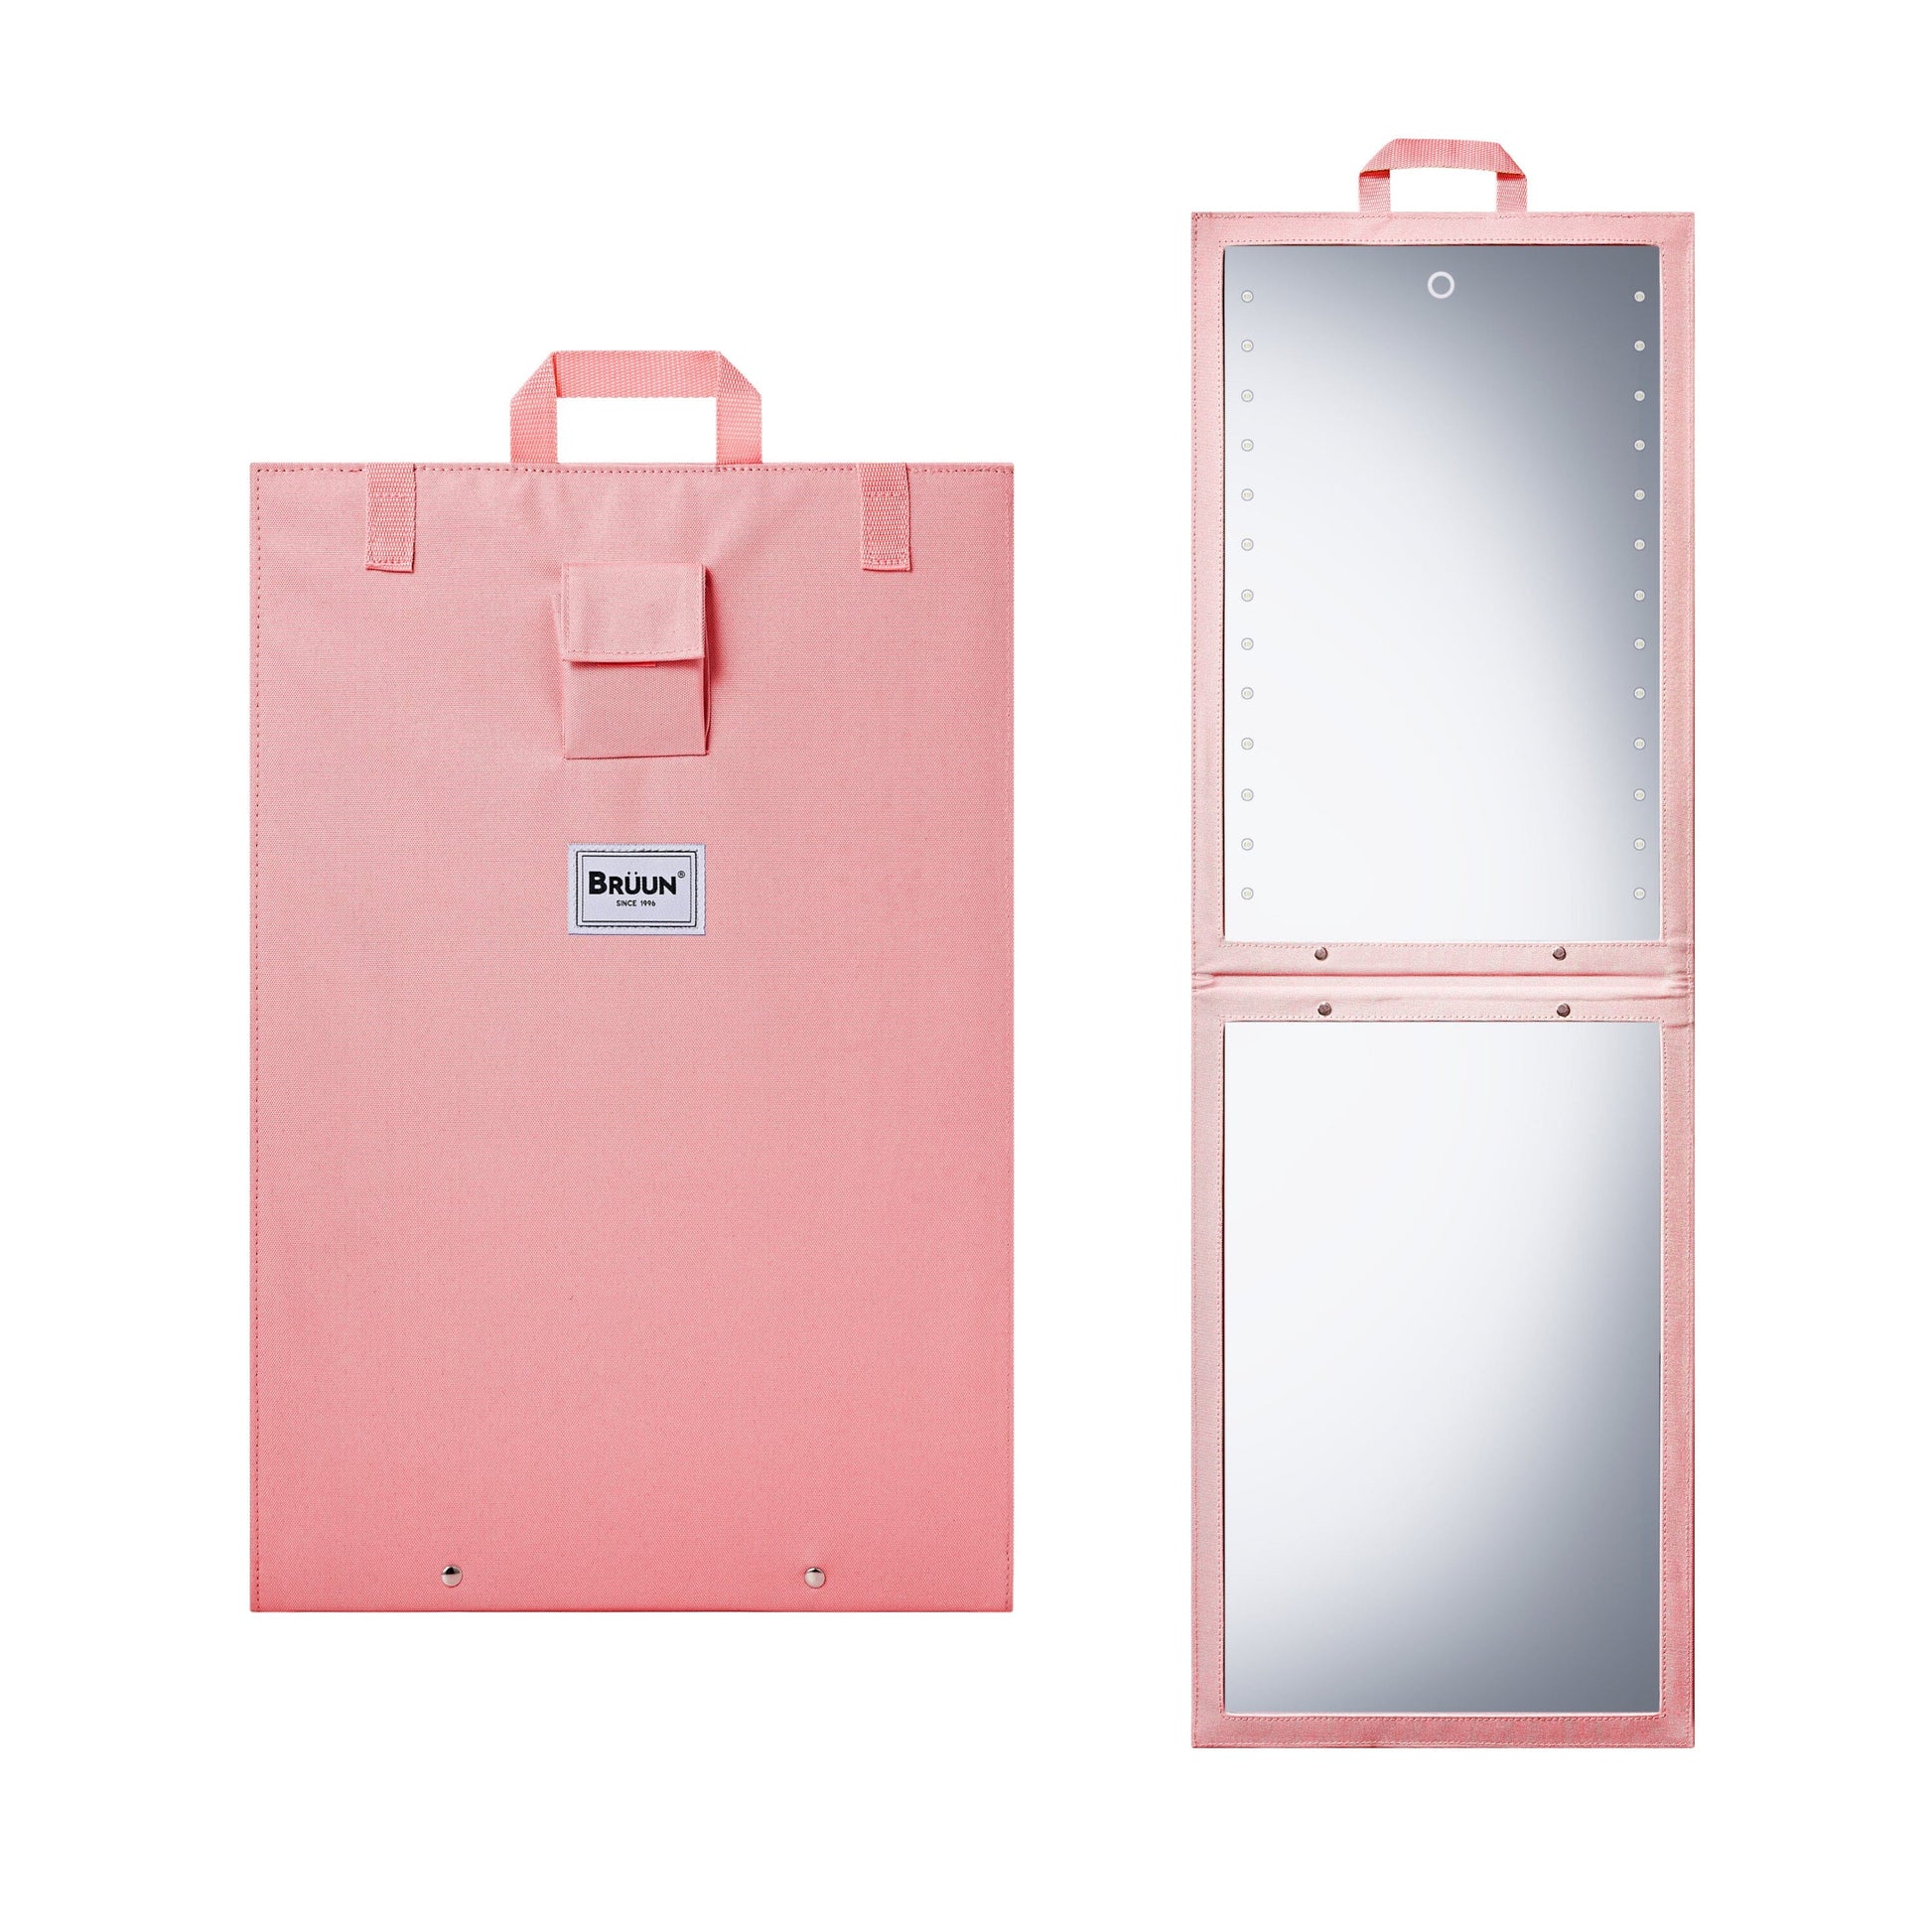 Backstage Hanging Mirror for Dance Bag with Dimmable LED Lights for Focused Glow with Touch Sensitive Power Button Bruun Beauty Pink 13.6" X 43.5" inhces 